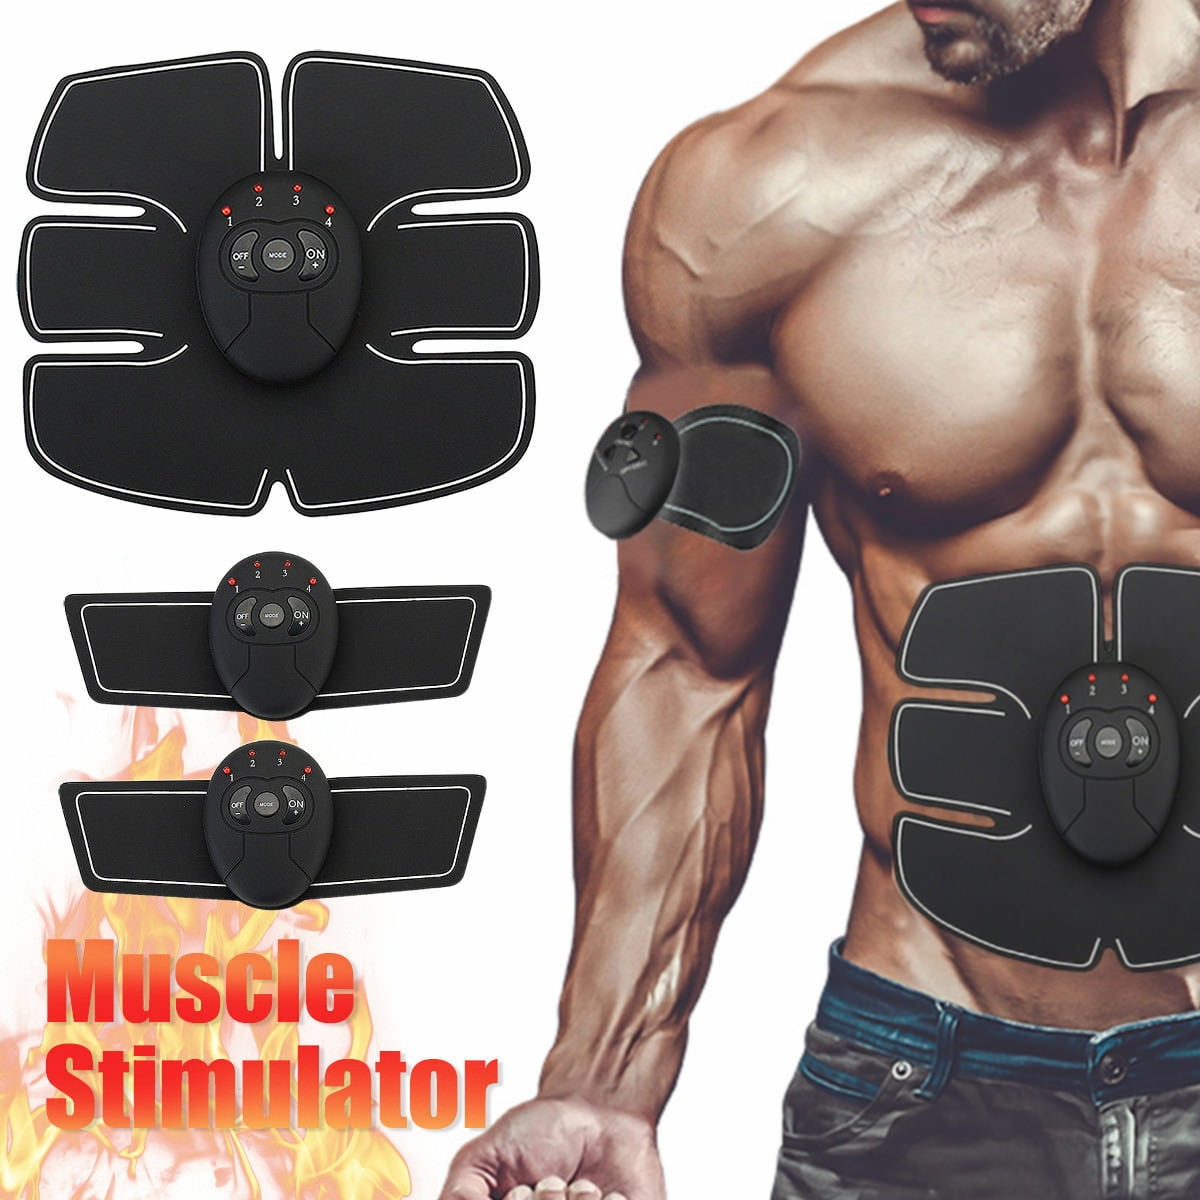 IMATE Abdominal Muscle Trainer EMS Abs Trainer Muscle Stimulator Ab Toning Belt Waist Trainer Belly Support Belt Gym Training Exercise Machine Home Fitness Training Gear